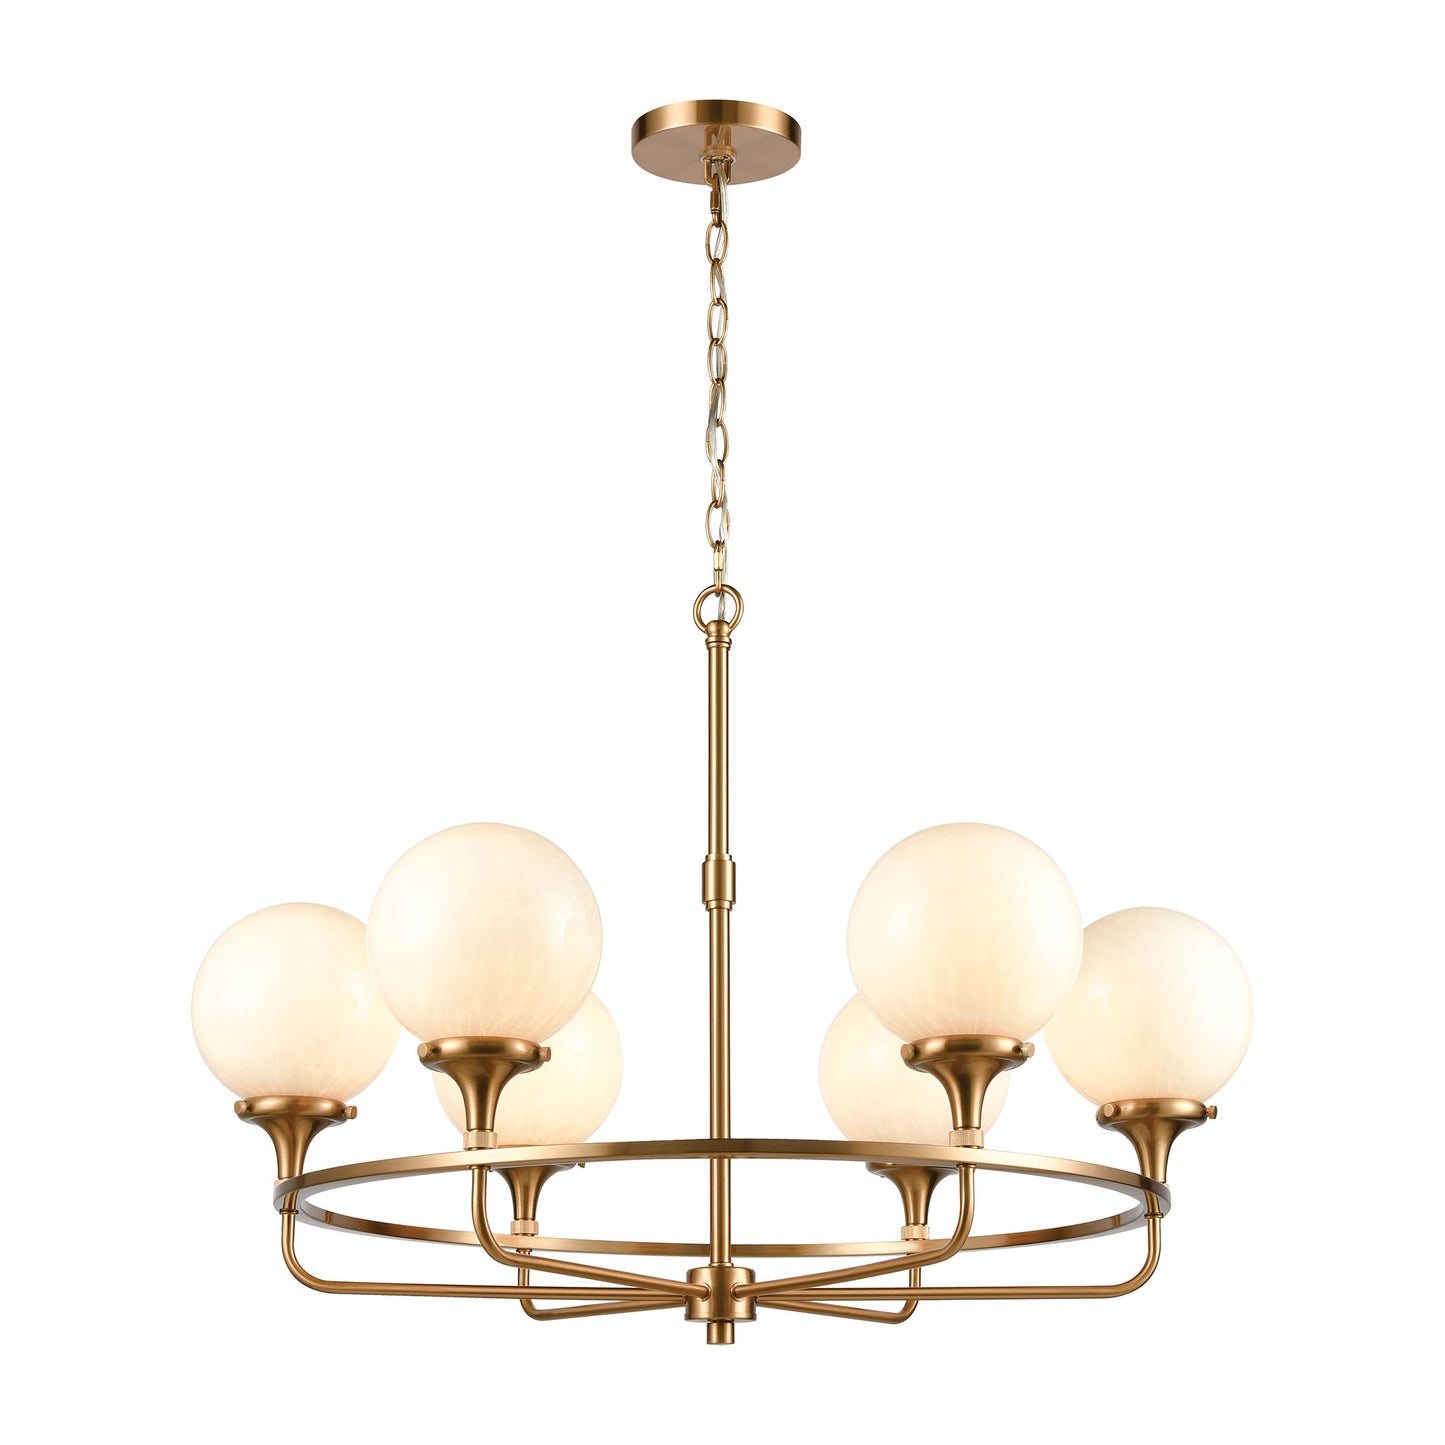 ELK Lighting 30146/6 - Beverly Hills 30" Wide 6-Light Chandelier in Satin Brass with White Feathered